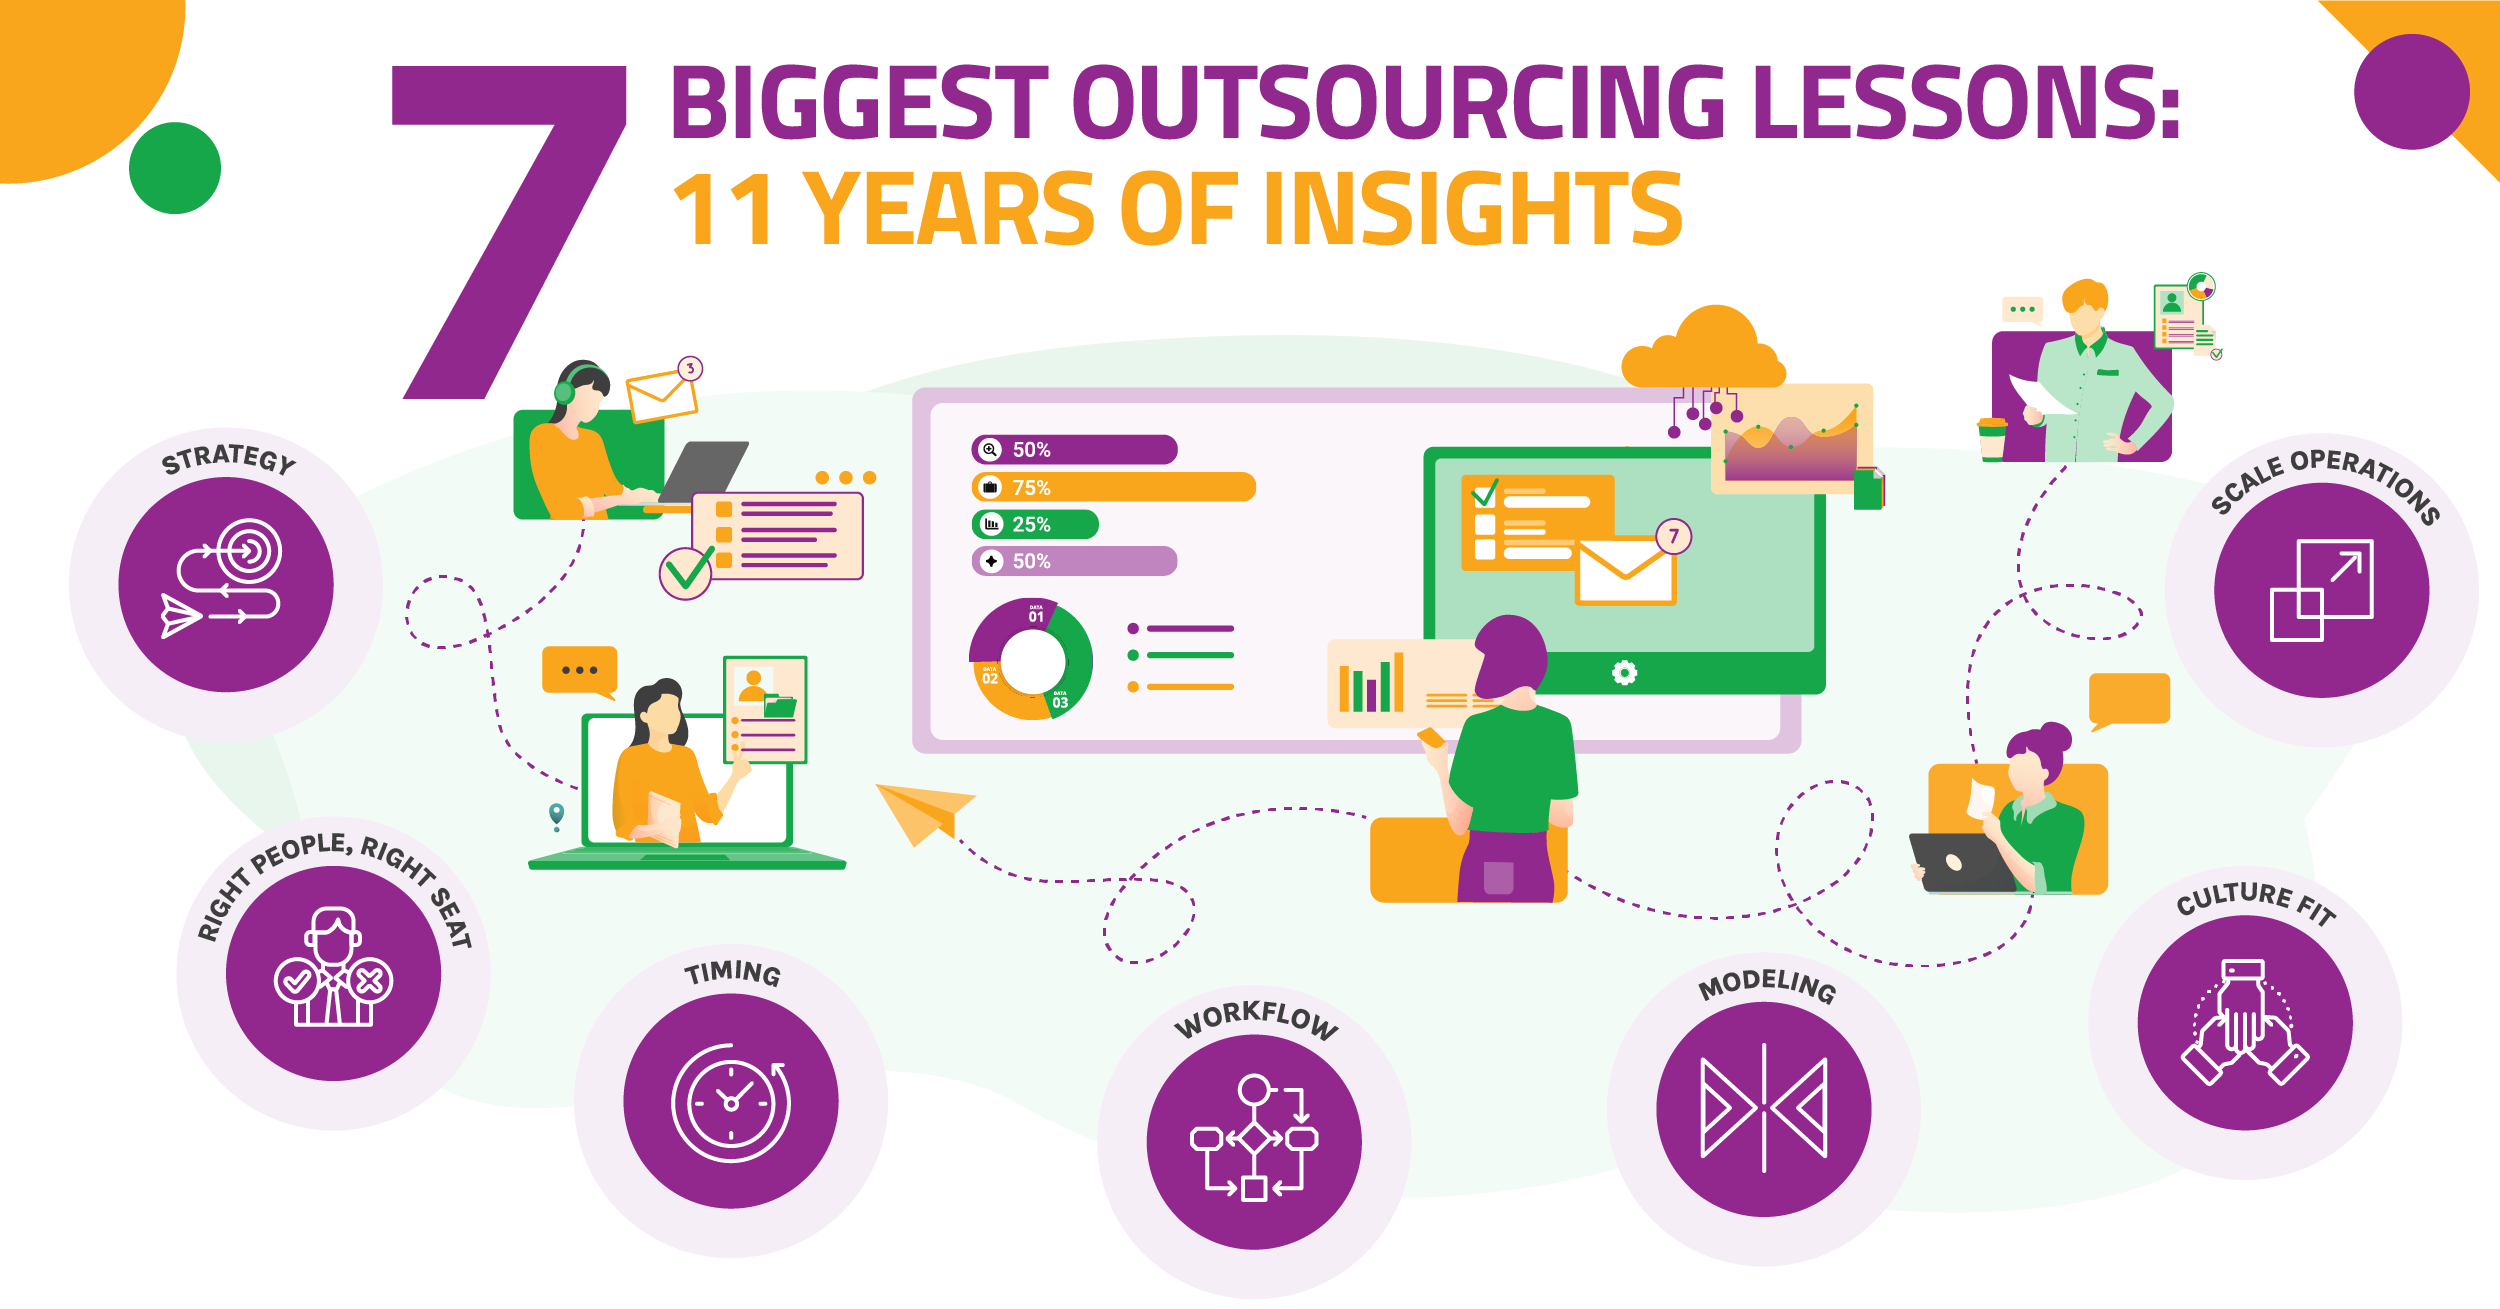 7 Biggest Outsourcing Lessons of the Past 11 Years